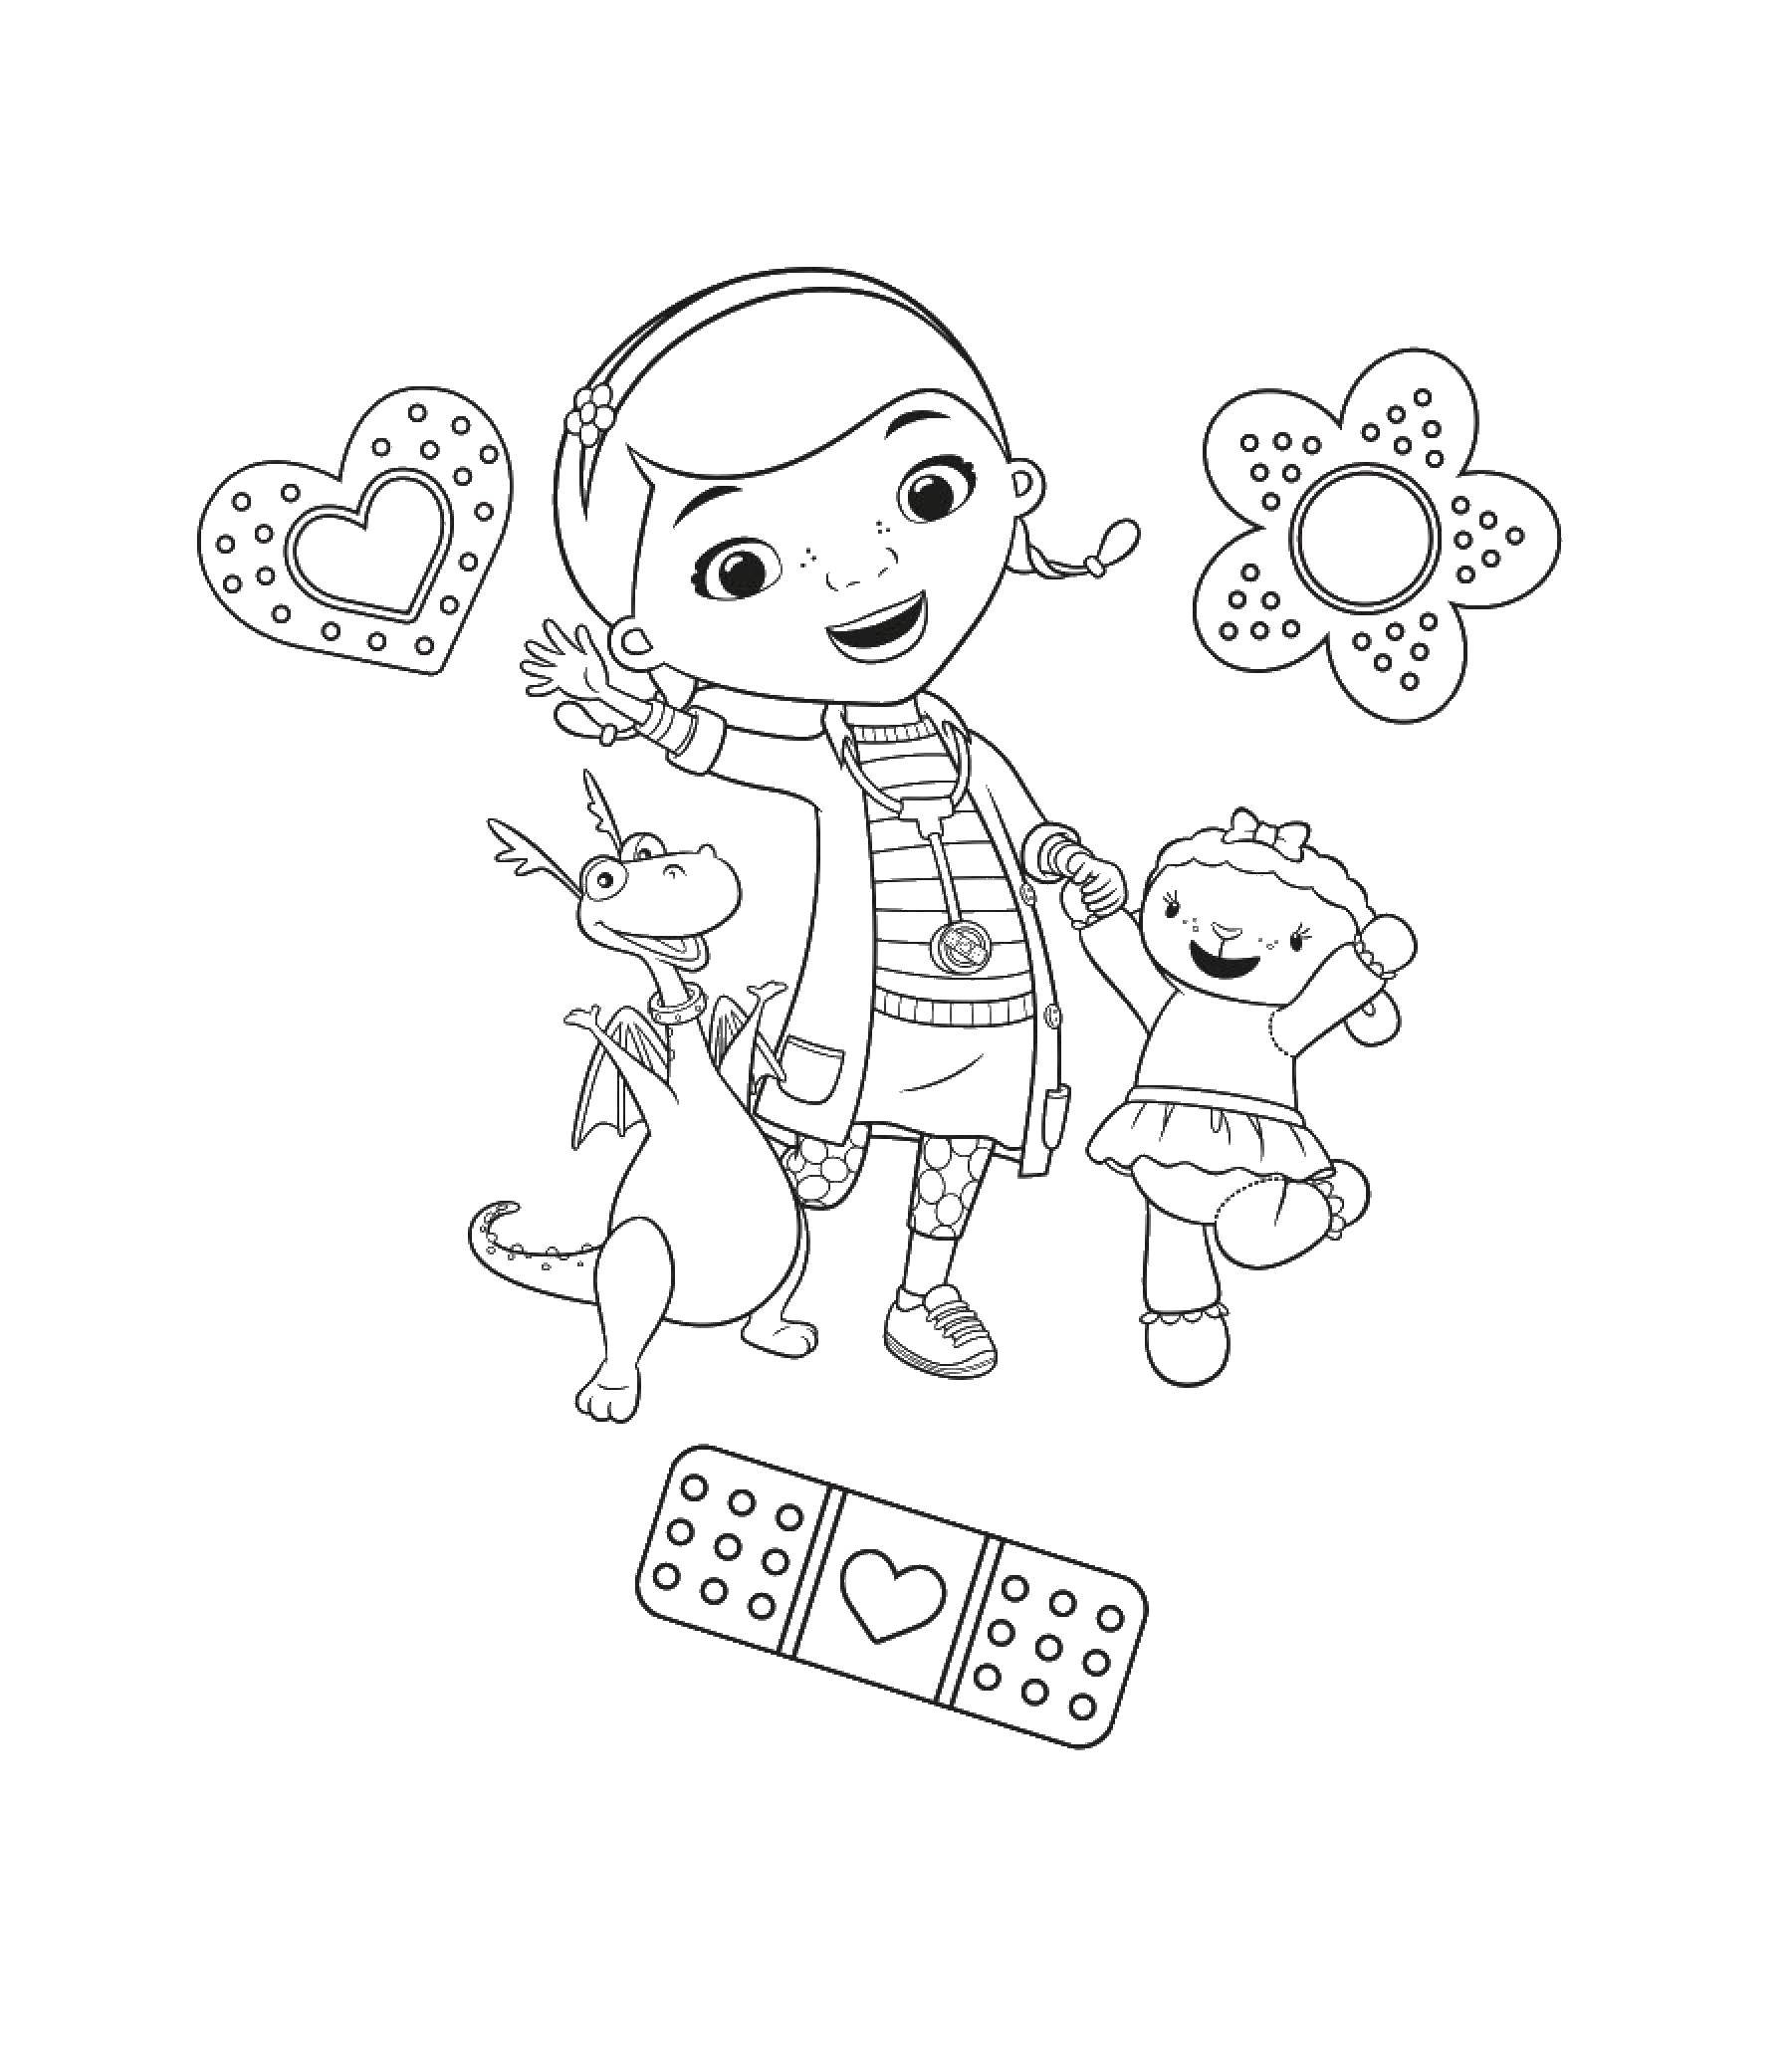 Coloring Doc mcstuffins with Lammy and stuffy. Category coloring. Tags:  Doc mcstuffins, Lammy, Stuffy.